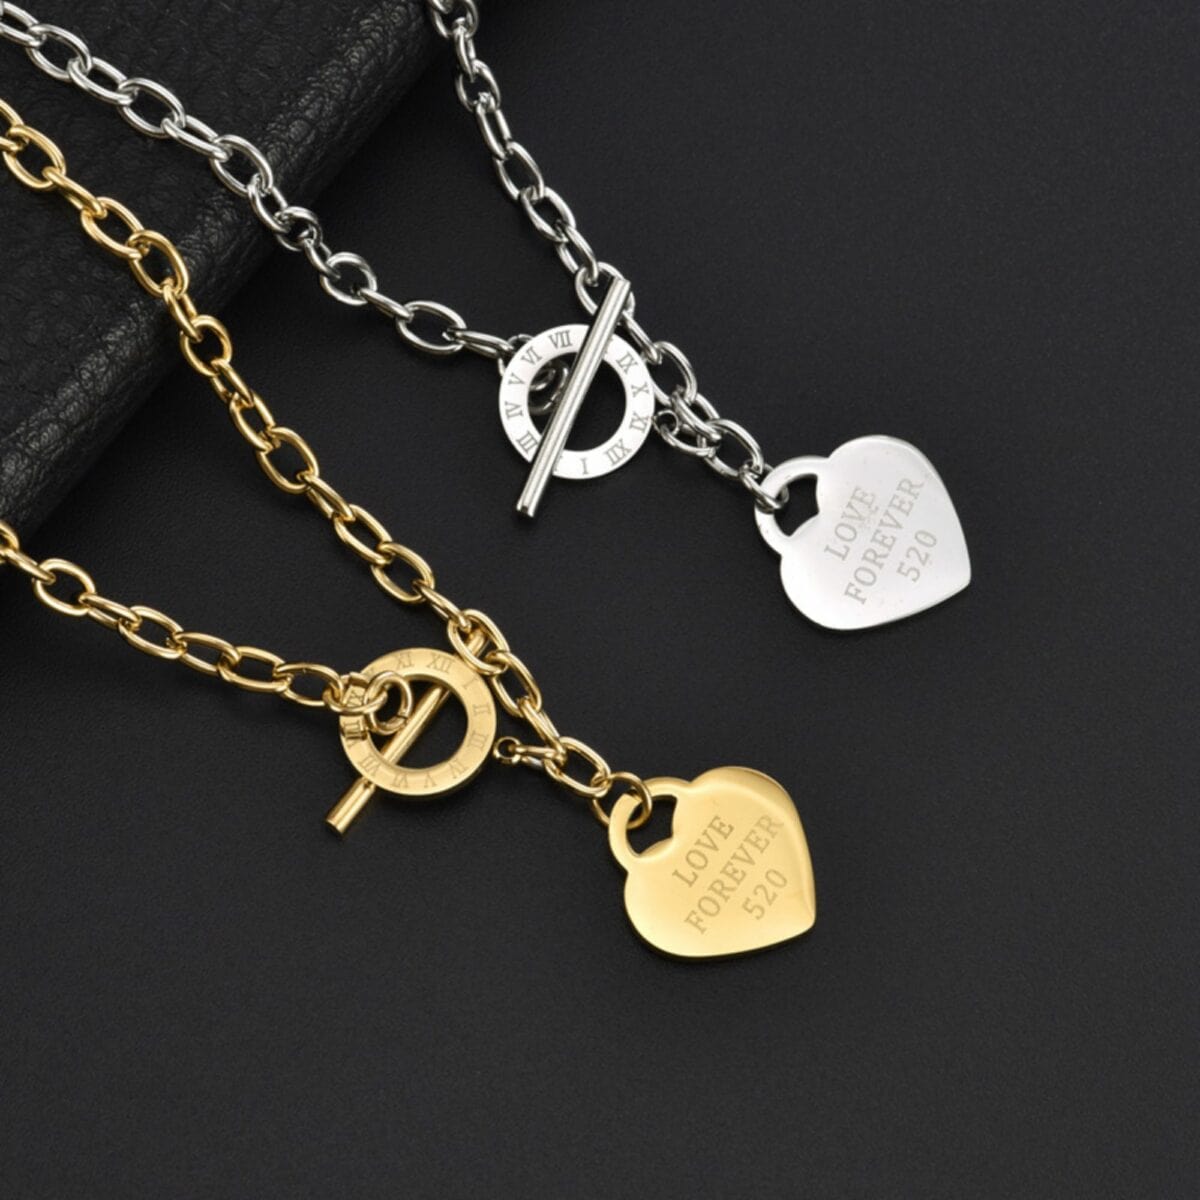 https://m.clubbella.co/product/gold-forever-heart-pendant-necklace/ 1674978438360